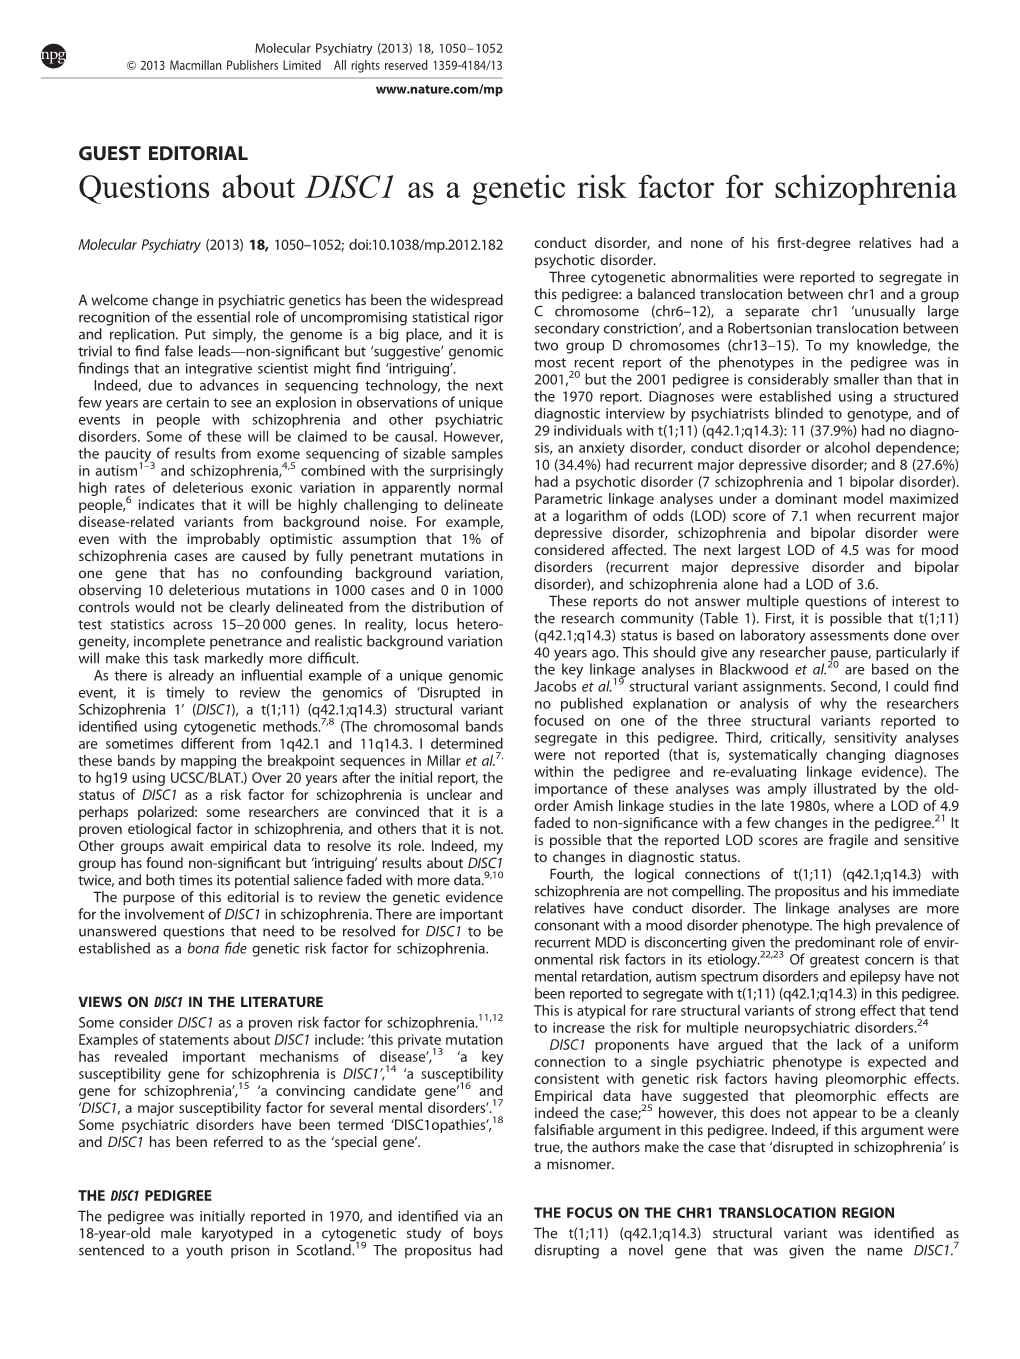 Questions About DISC1 As a Genetic Risk Factor for Schizophrenia